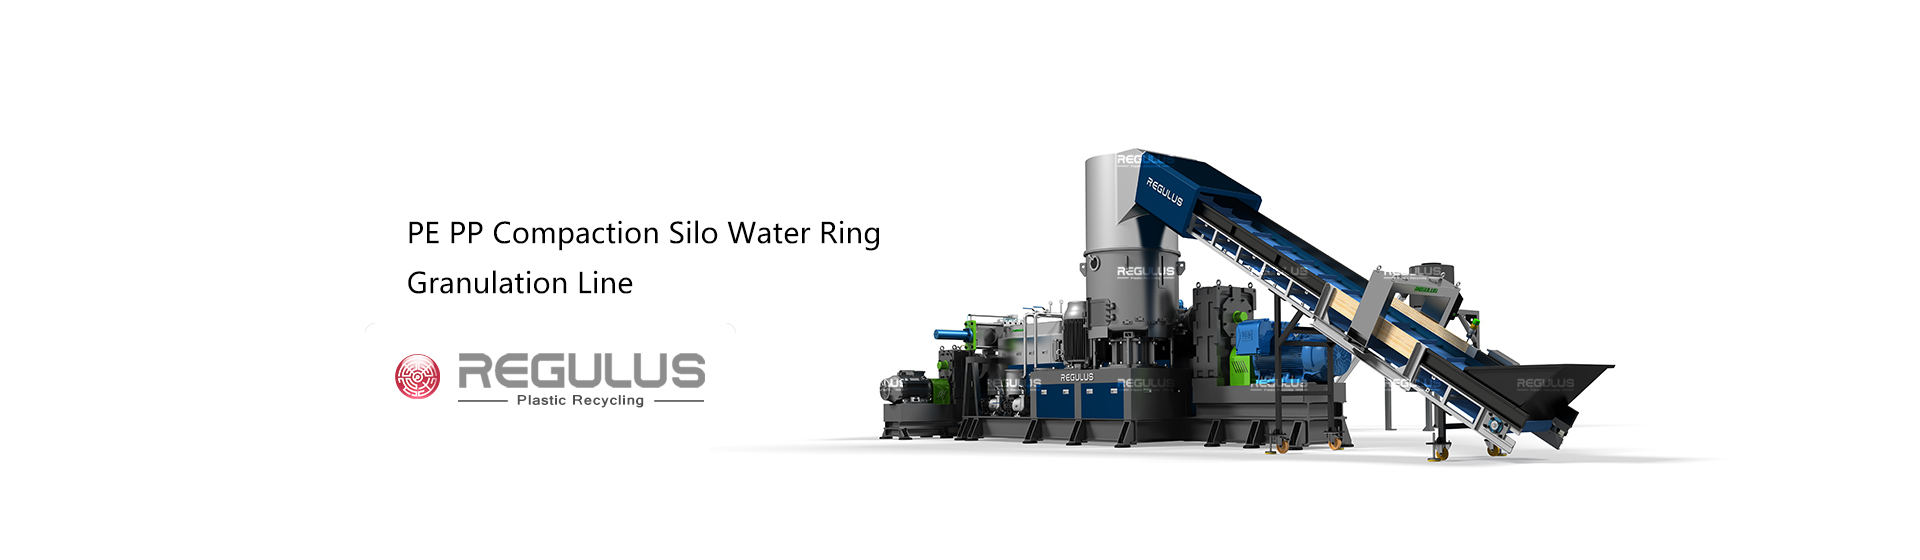 Revolutionizing Plastic Waste Management: The Plastic PP PE Washing Recycling Line